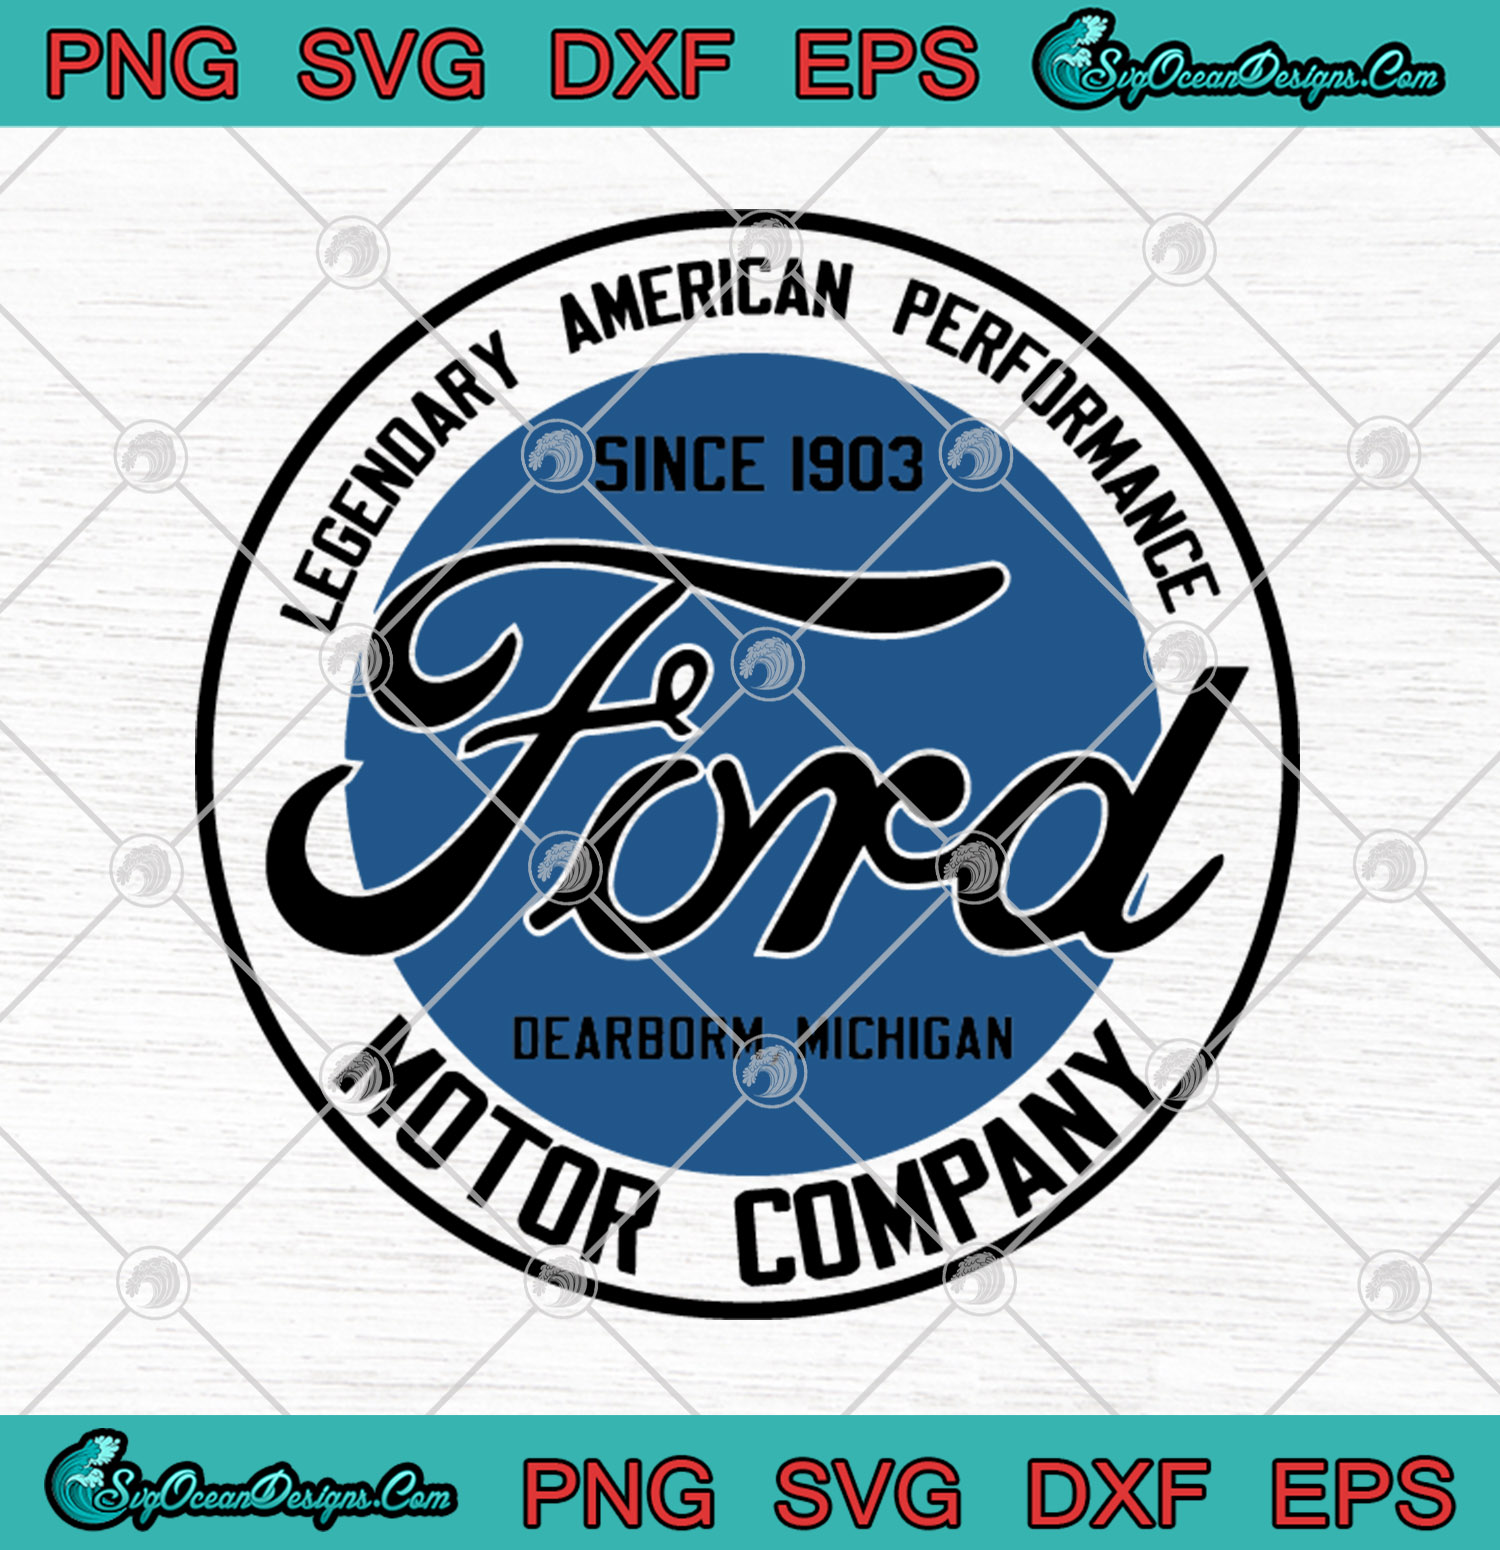 Legendary American Performance Ford Motor Company 1903 Dearborn